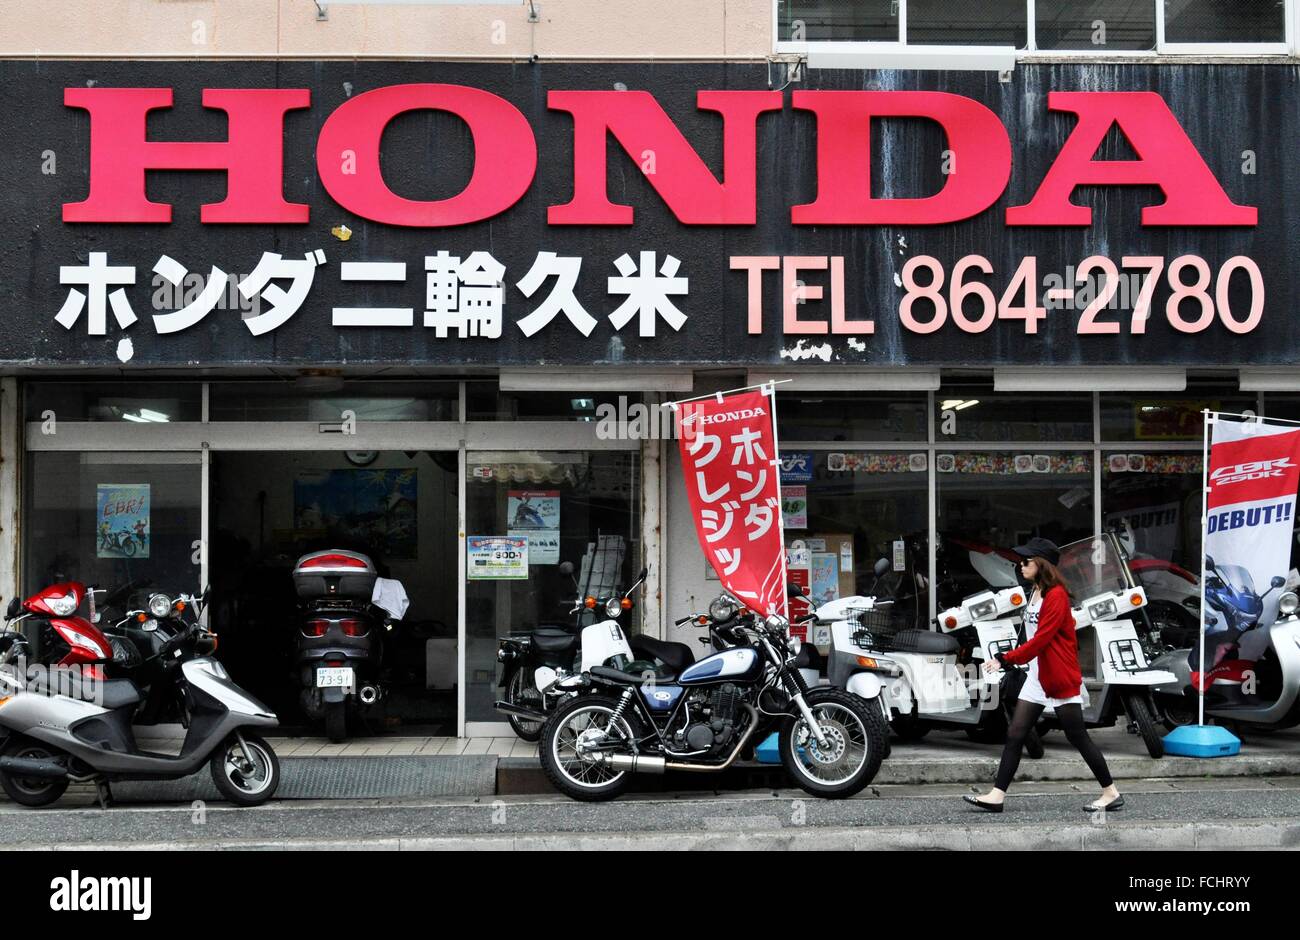 Honda Motorcycle Japan High Resolution Stock Photography And Images Alamy